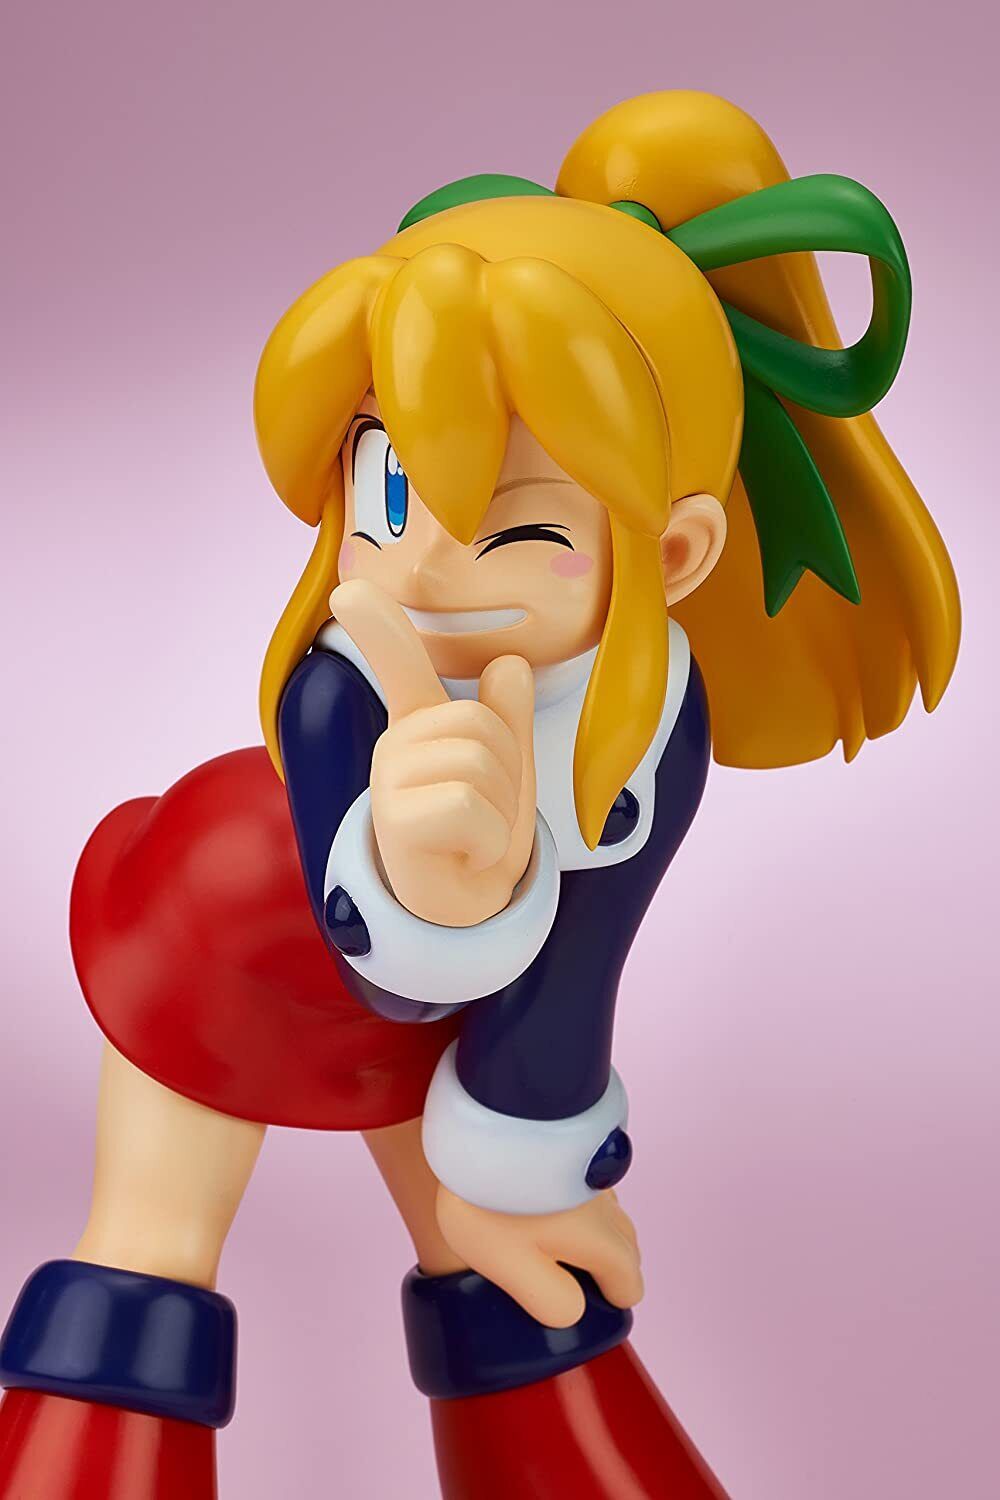 Gigantic Series Rockman [Roll-chan] Approximately 300mm Made of PVC Last1 Japan